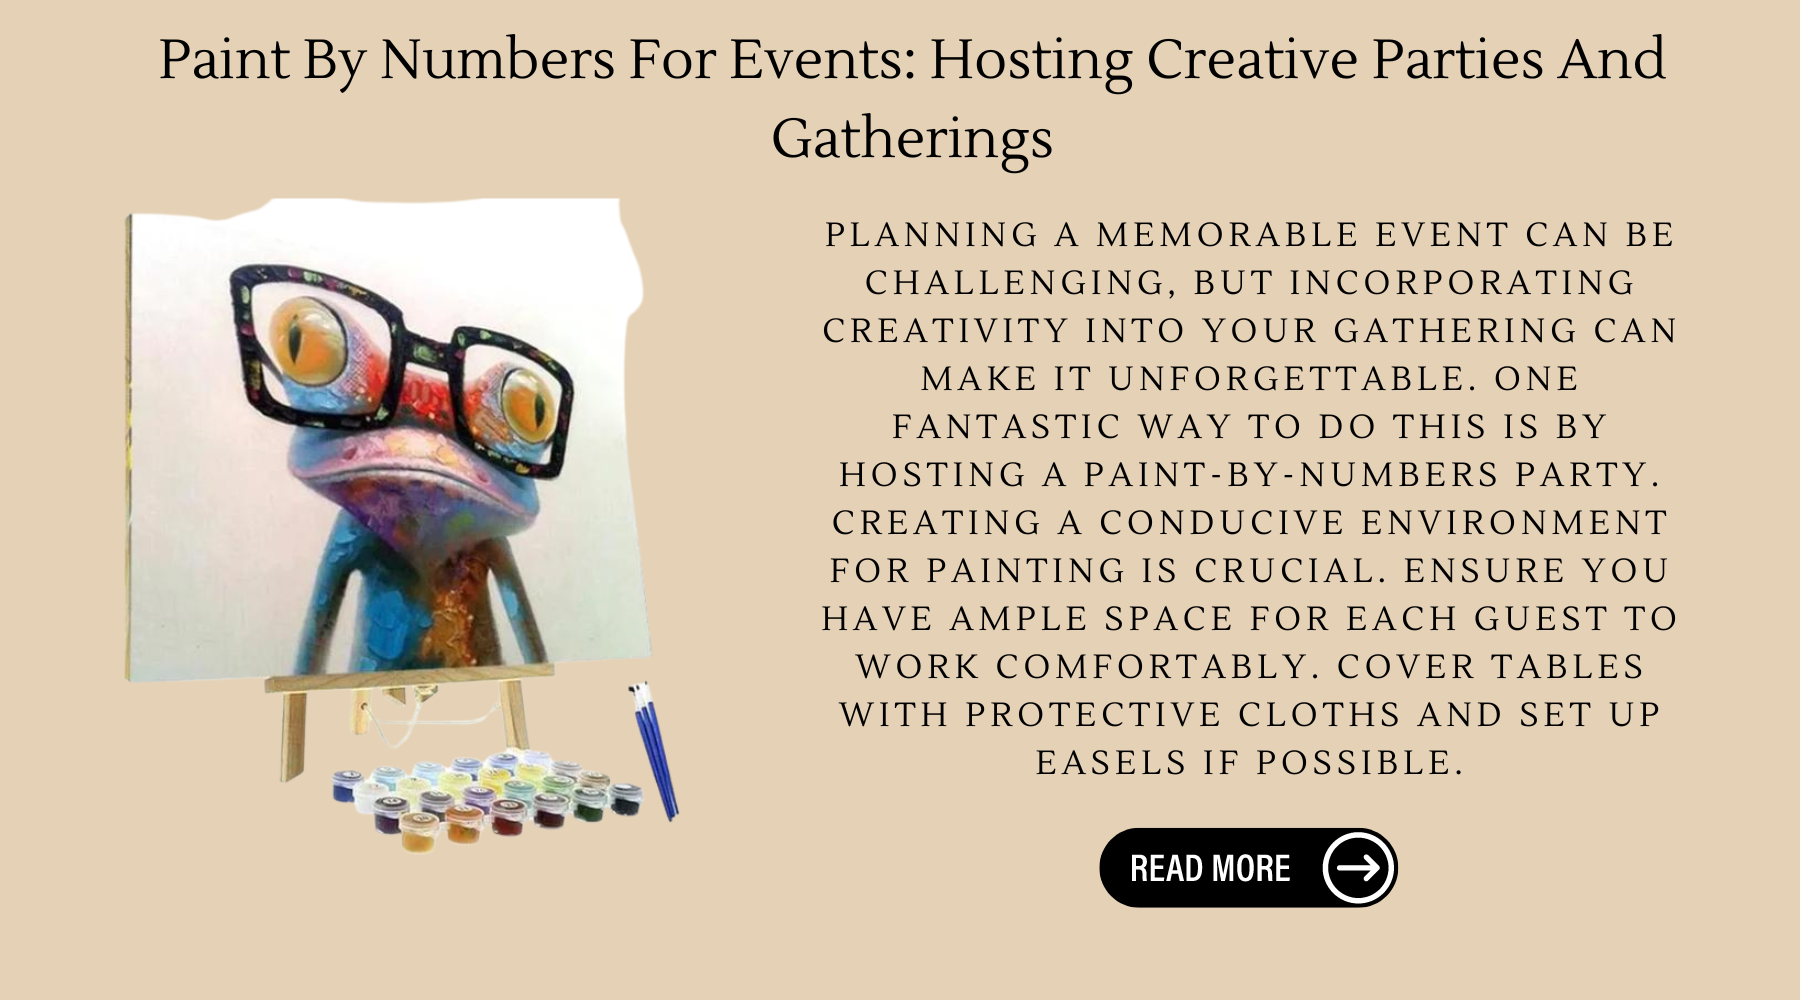 Paint By Numbers For Events: Hosting Creative Parties And Gatherings